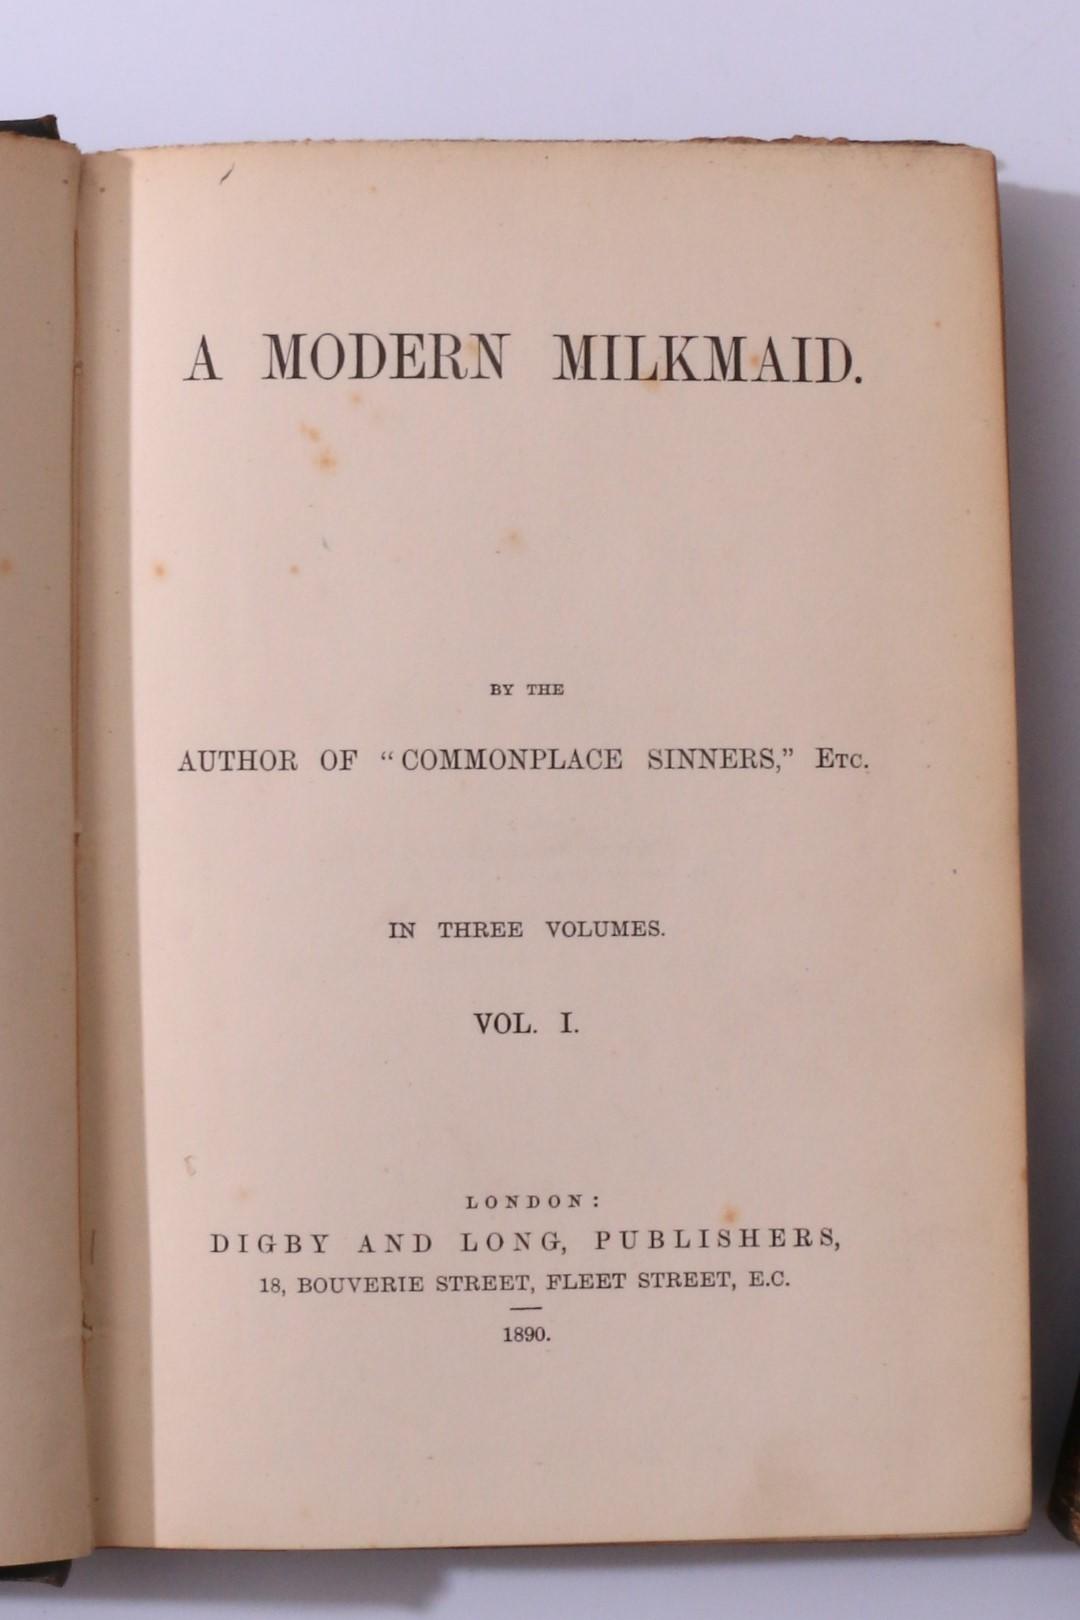 Elinor Louisa Huddart - A Modern Milkmaid - Digby and Long, 1890, First Edition.